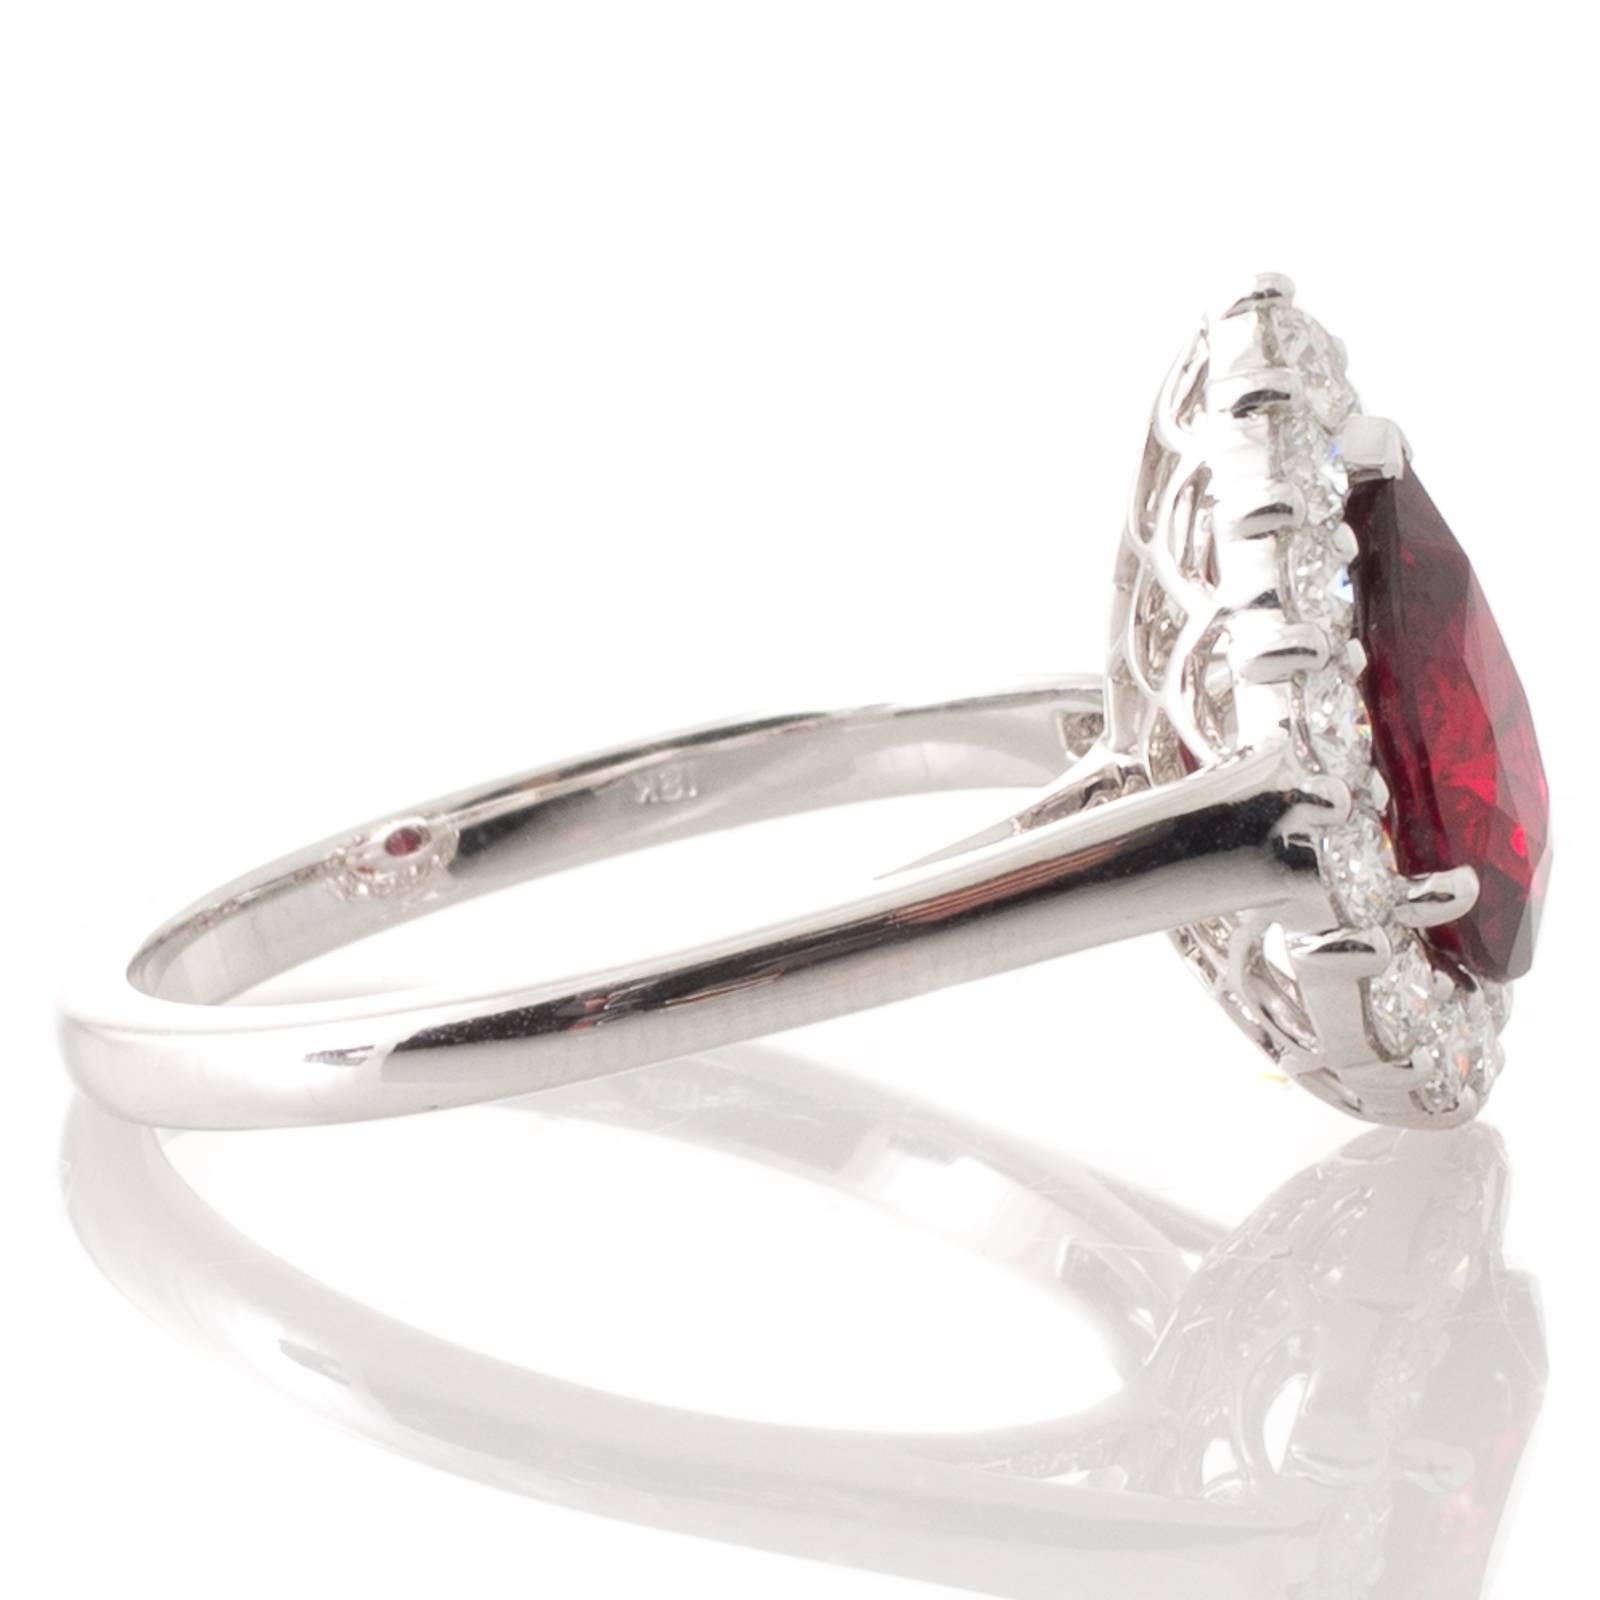 Pear Cut Pear Shape 1.57 Carat Mozambique Ruby and Diamond Cluster Ring